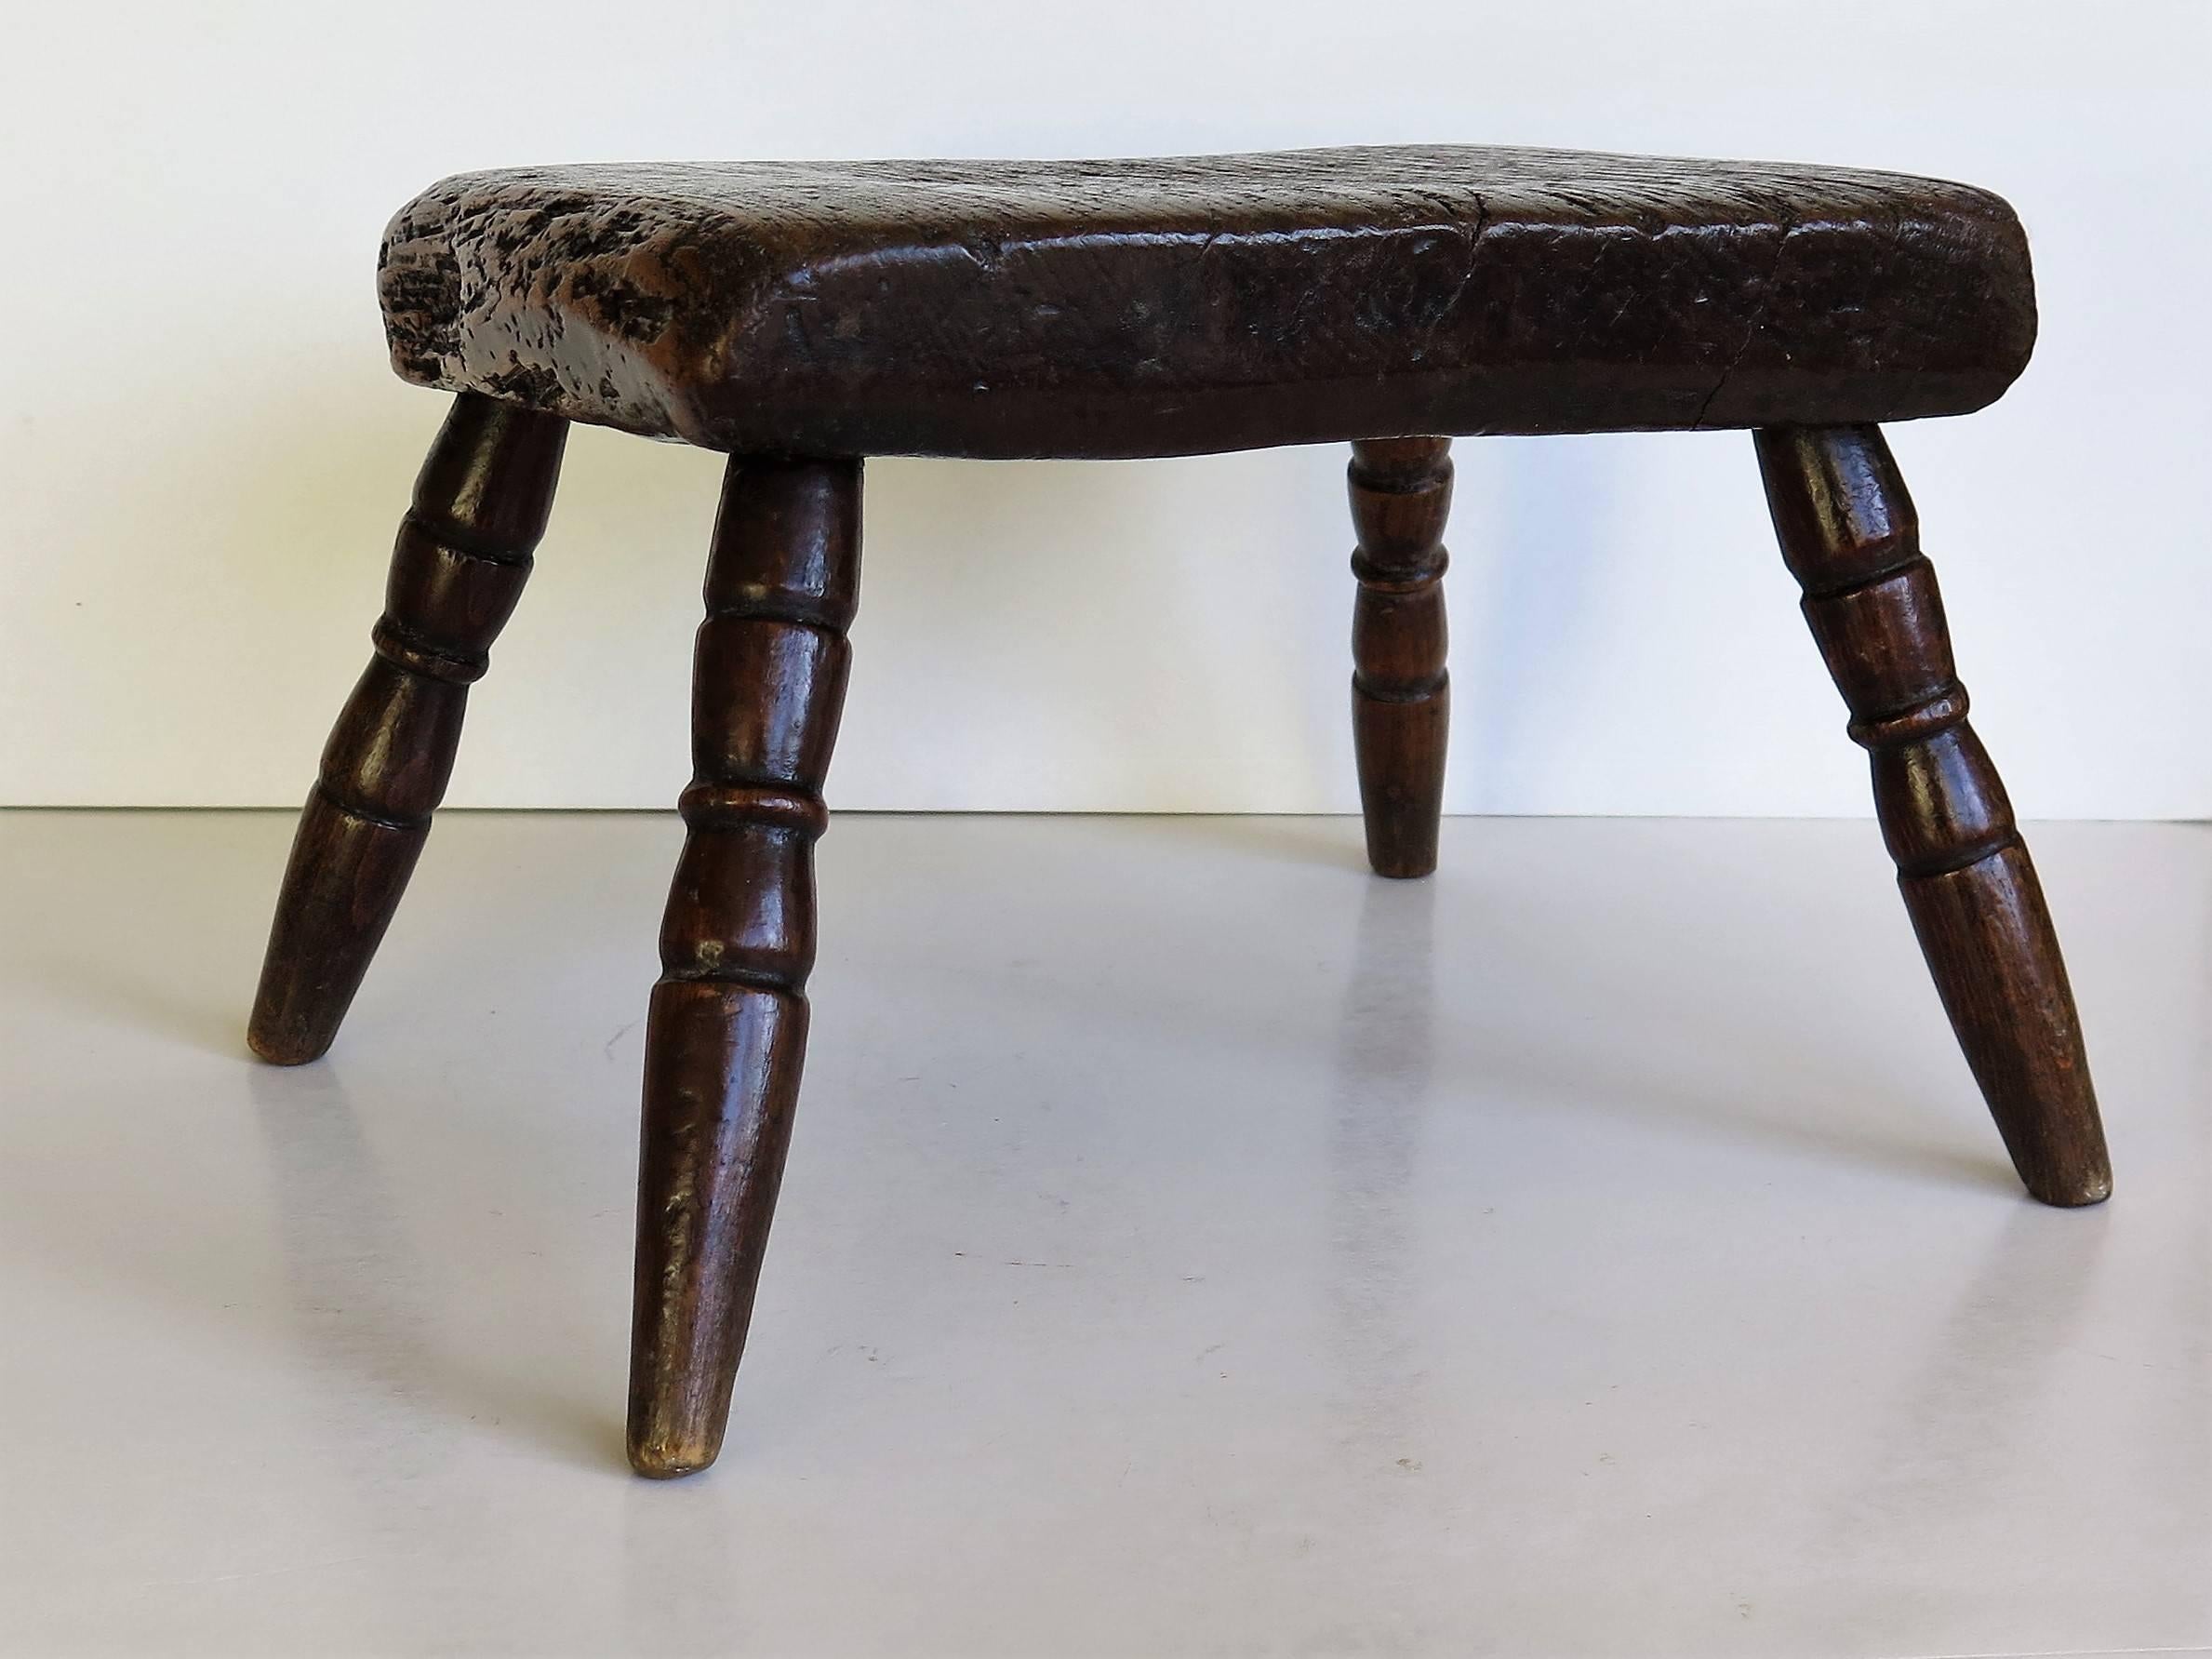 This is a late 18th century candle stand or stool and is a good example of English Country furniture.

The thick rectangular top is made of solid elm and has a chamfered lower edge. The legs are particularly good and are of narrow proportions